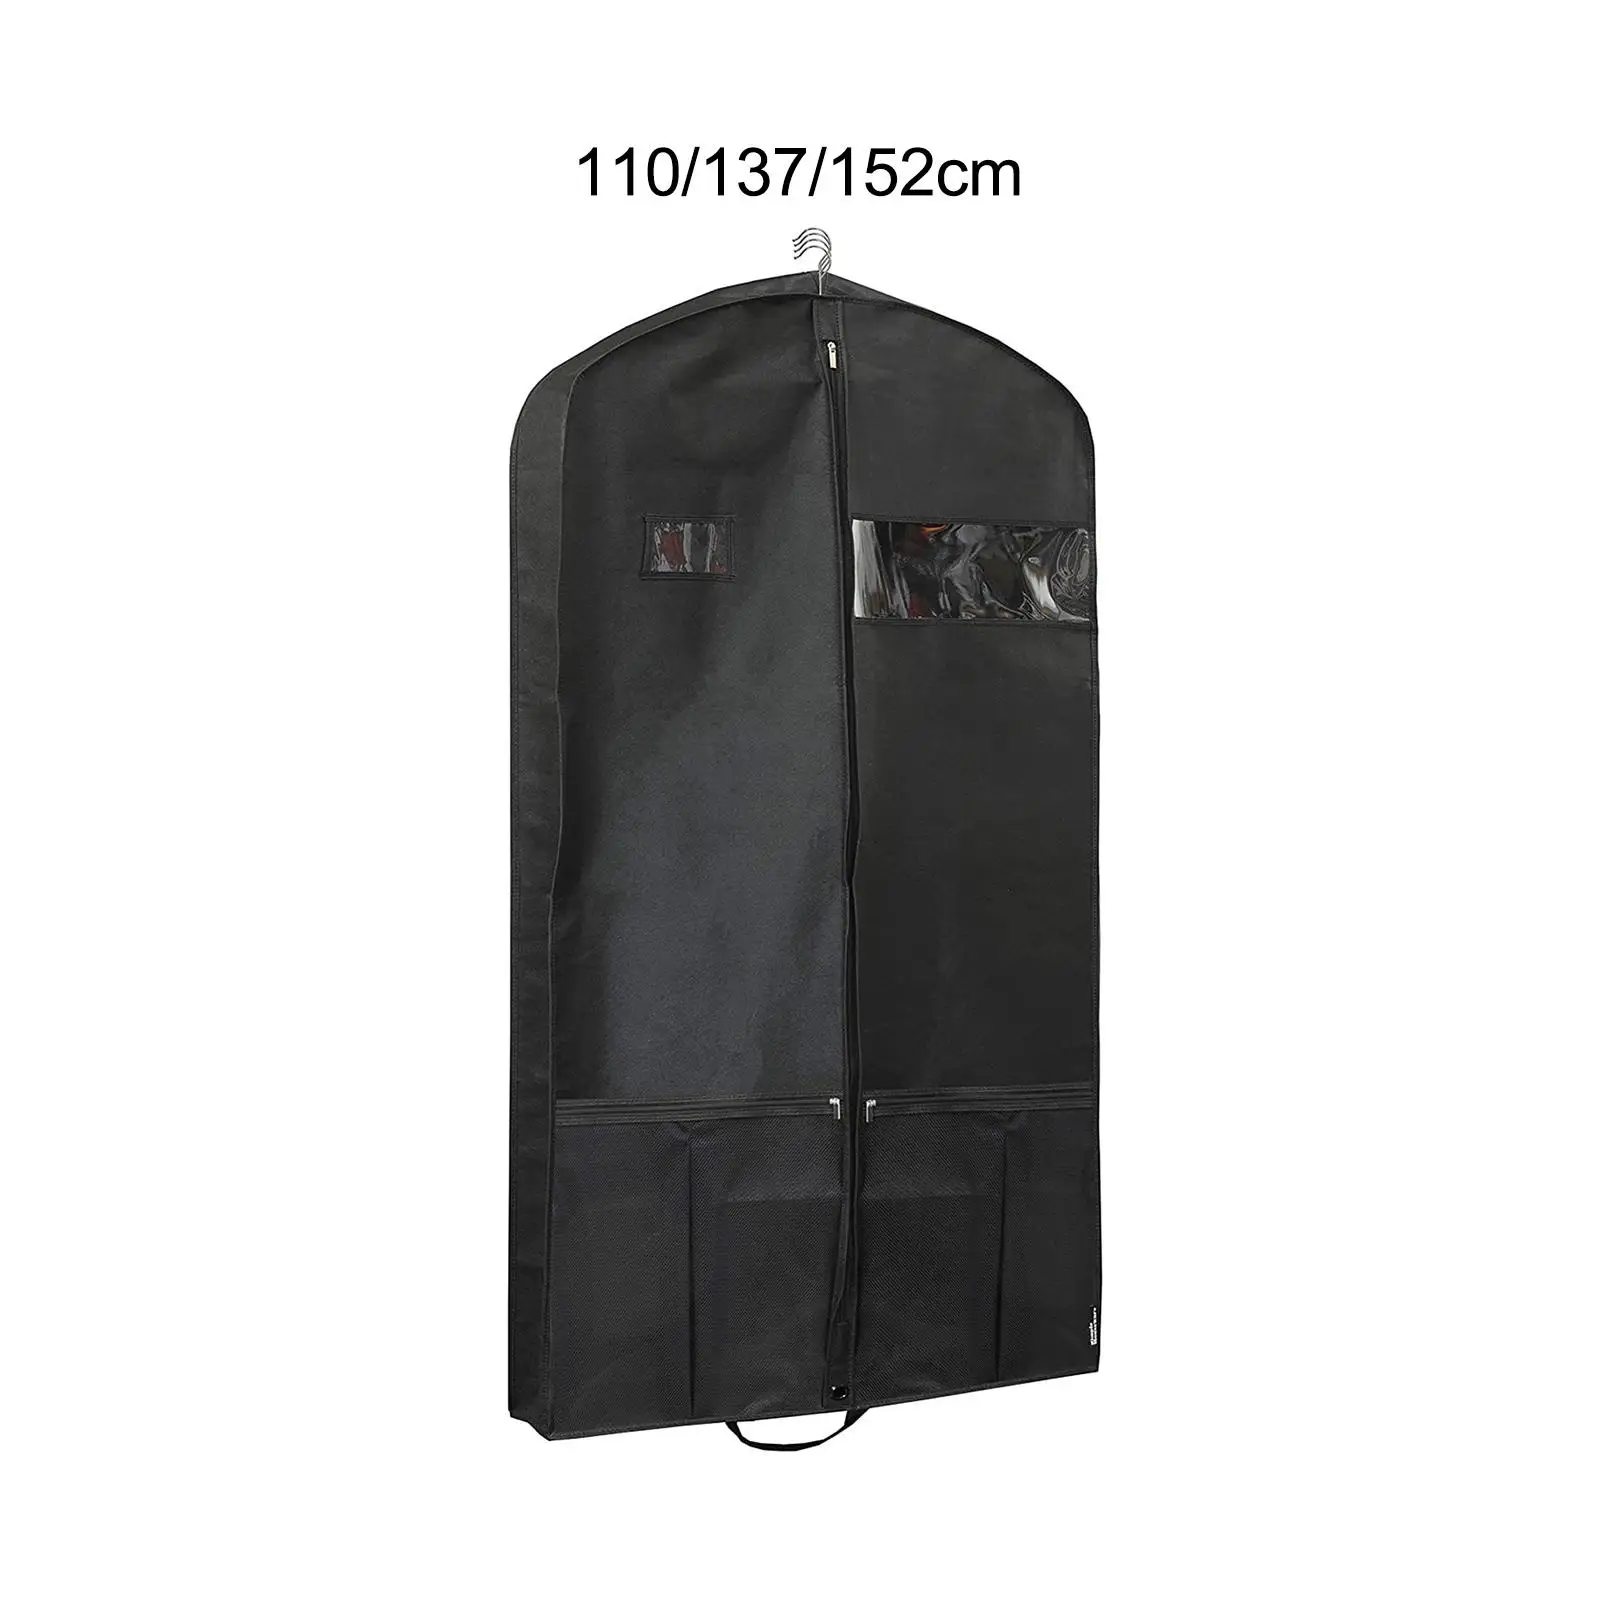 Garment Bag Water Resistance 2 Extra Pocket ,Protect Cloths from Dust and over Wrinkling Suit Bag Garment Cover Protector